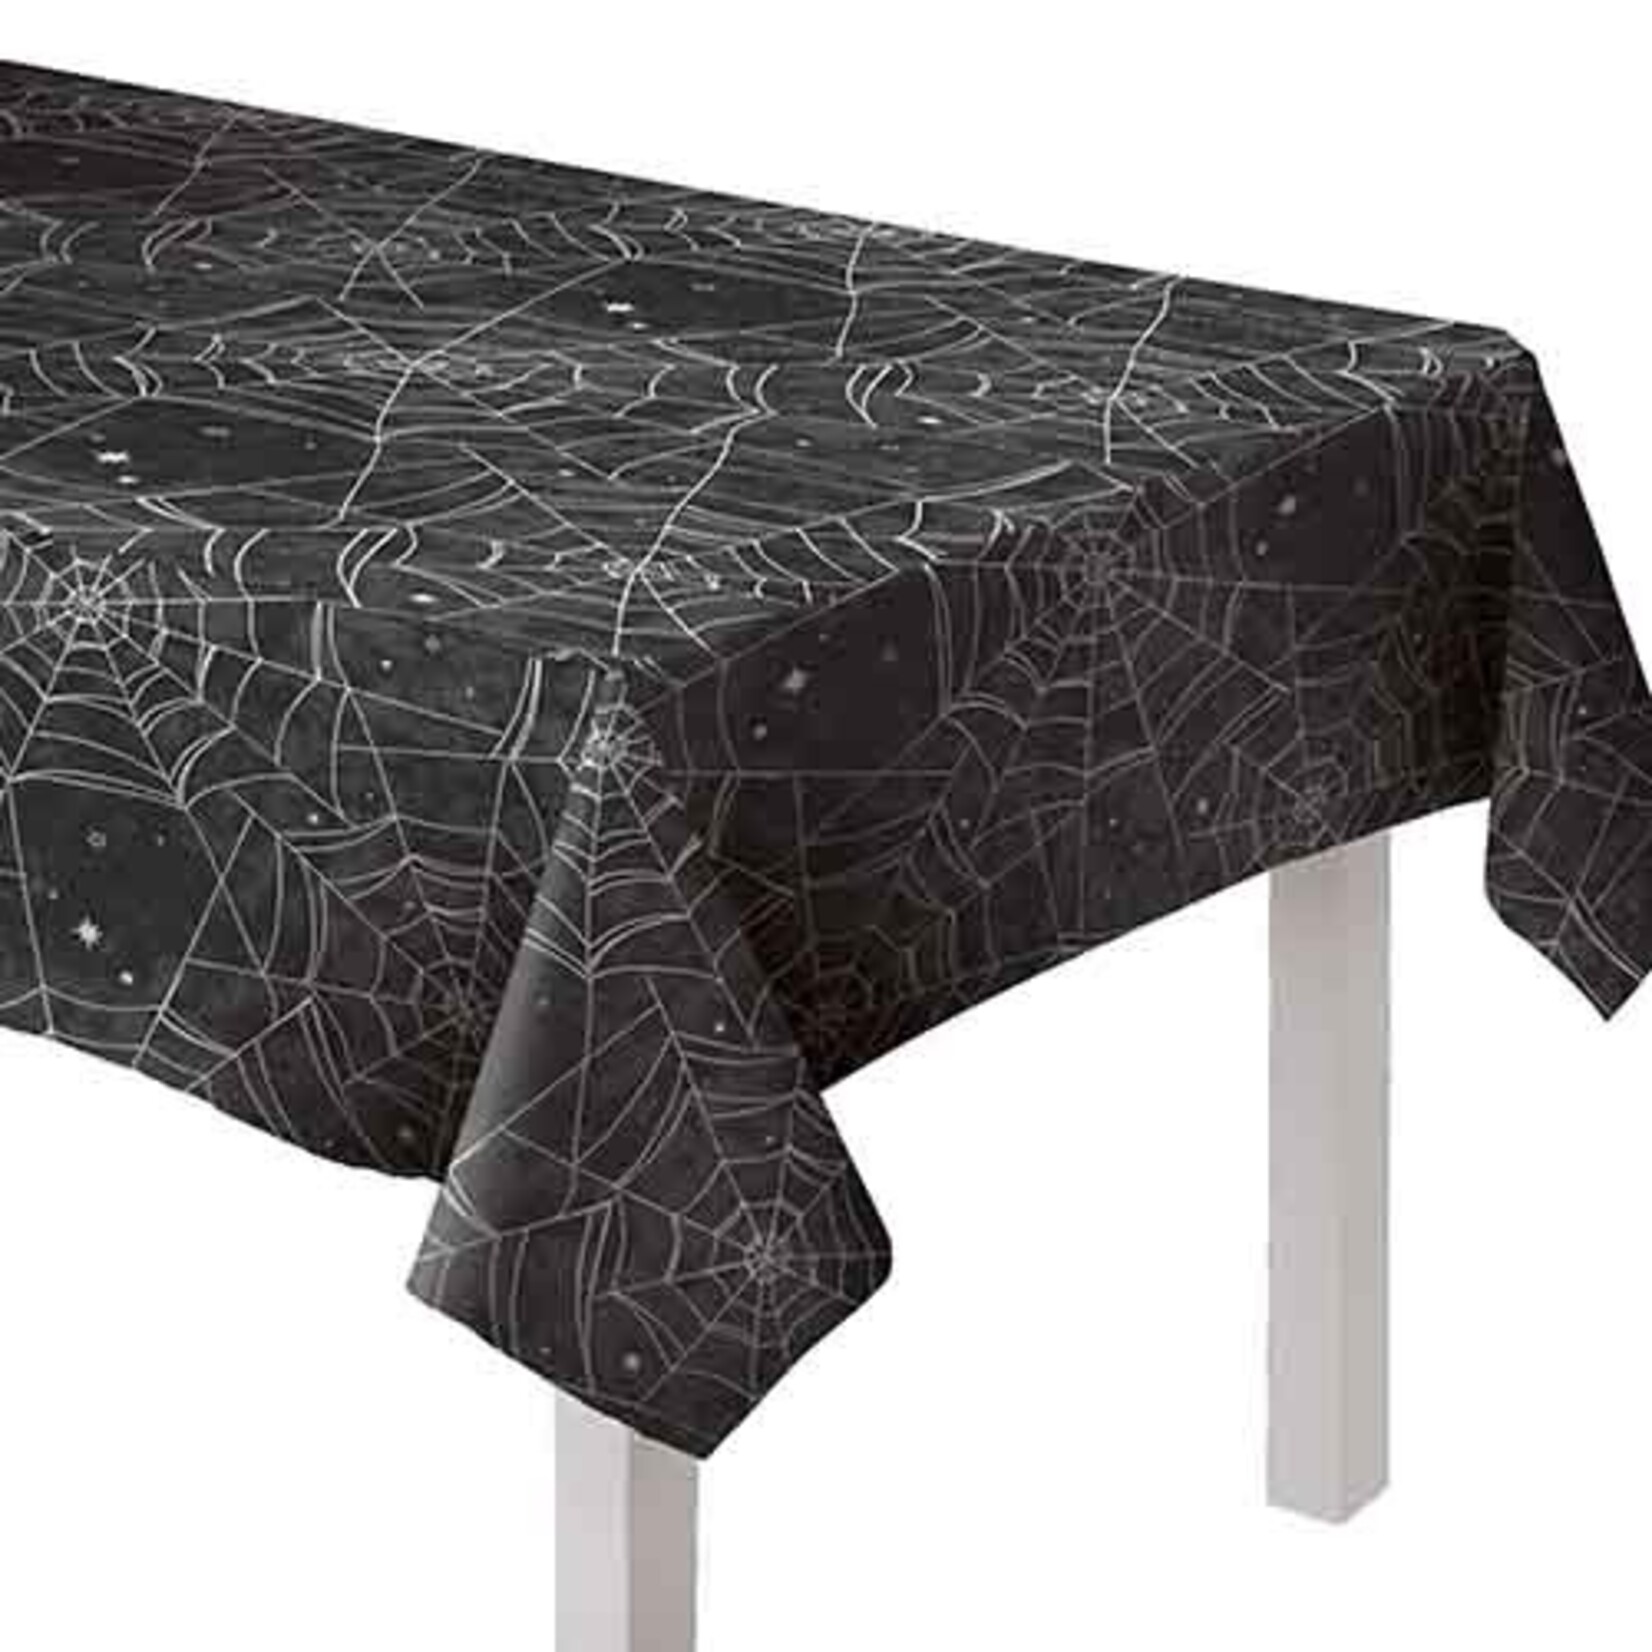 Amscan Black Spider Web Flannel Backed Table Cover - 52" x 90"